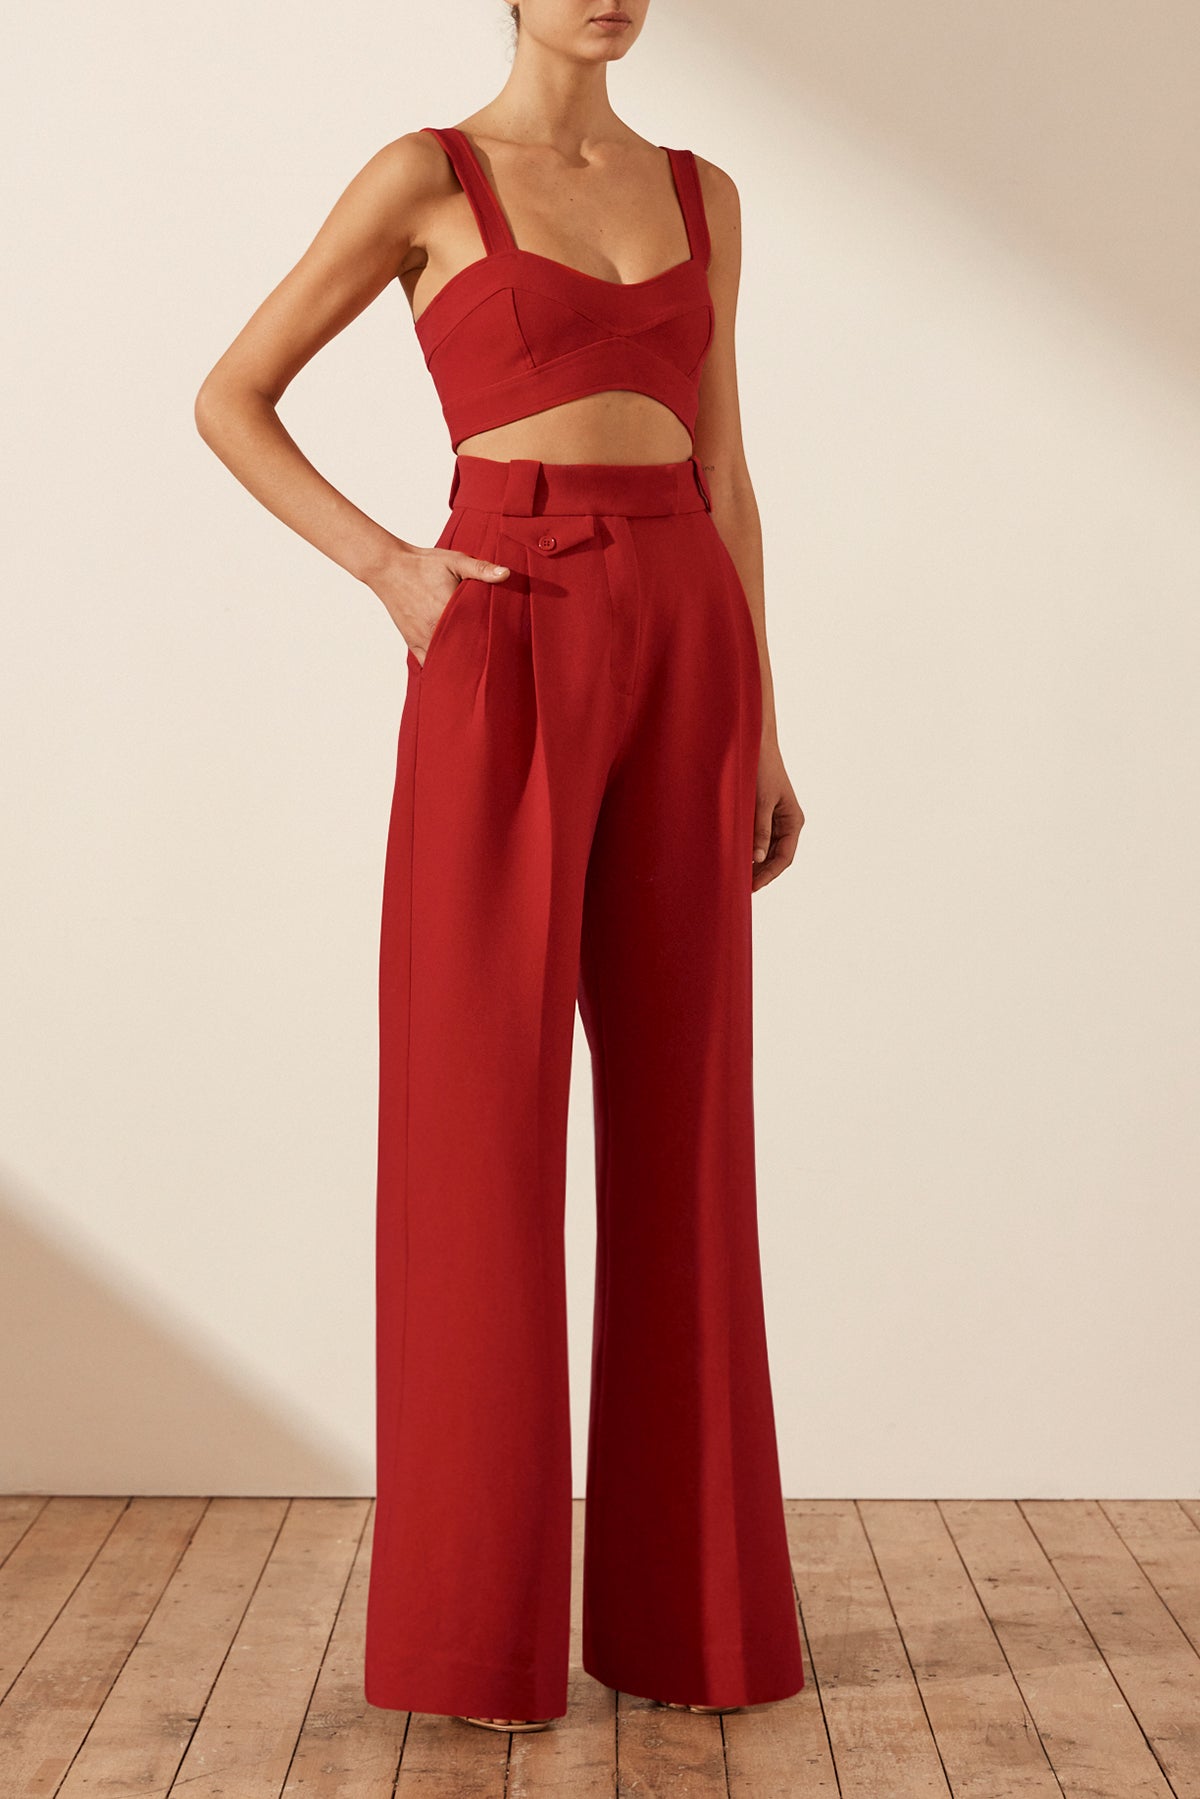 Irena Panelled Bralette - Roma Red